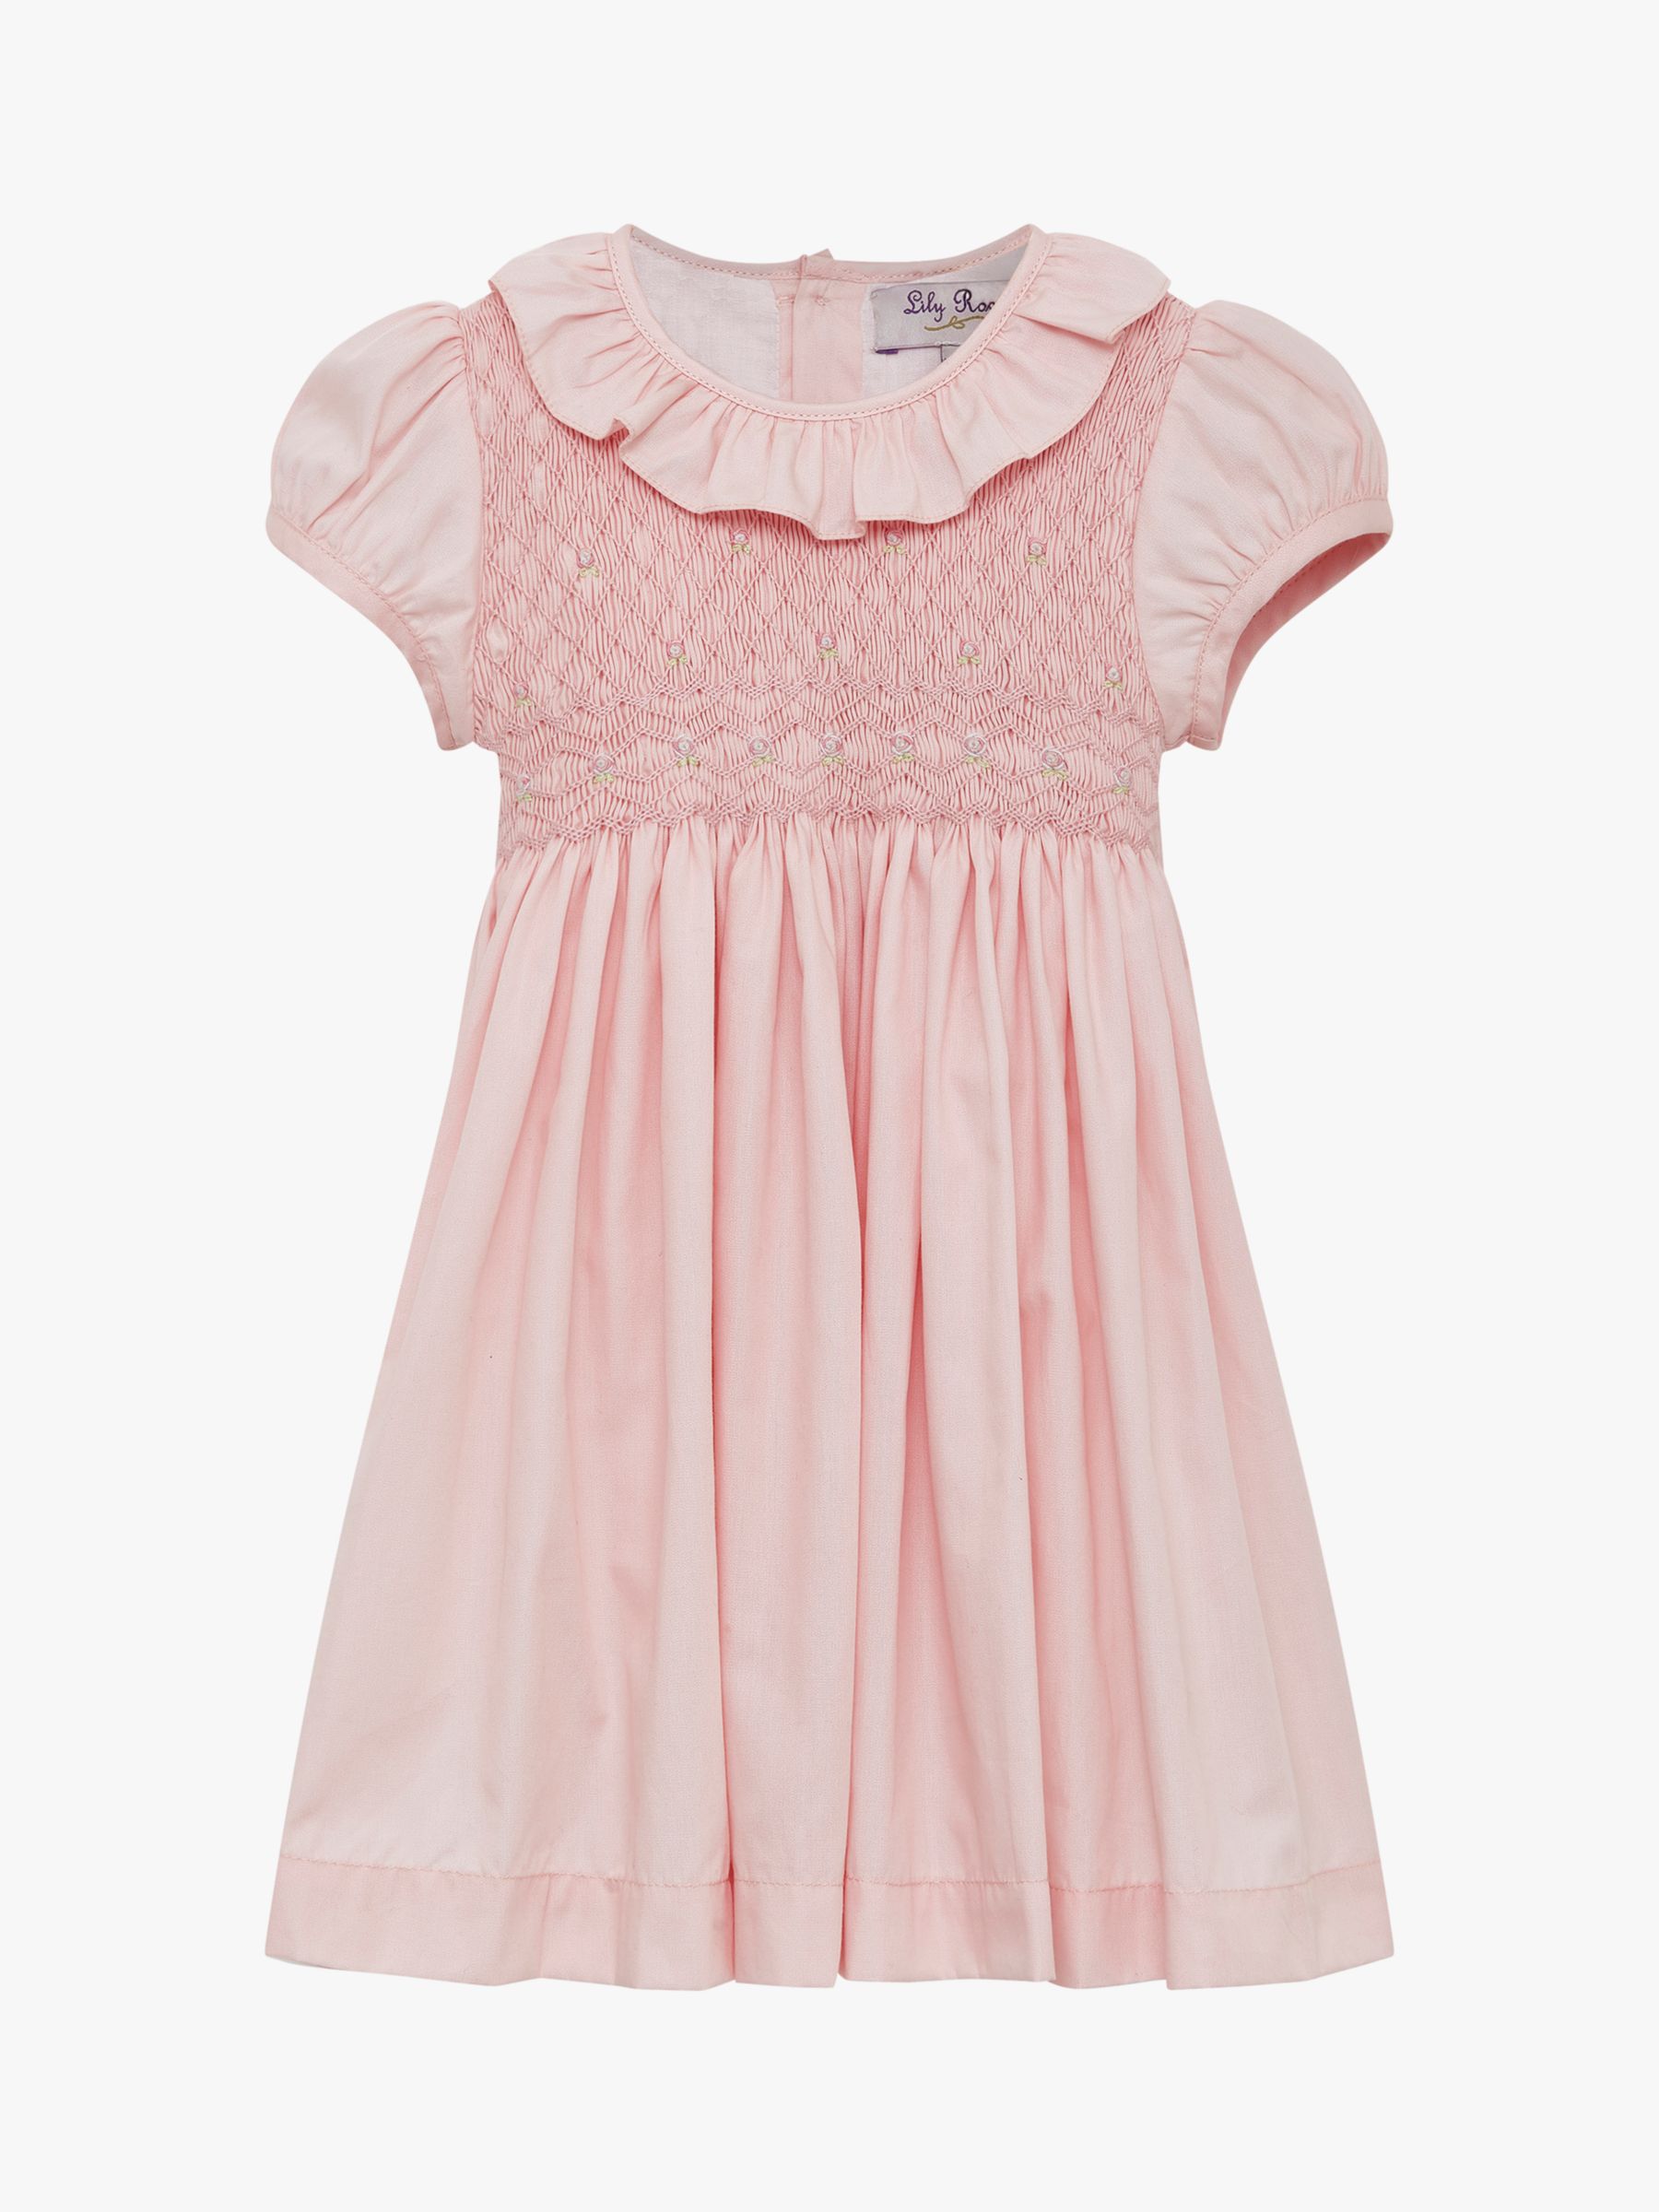 Trotters Willow Baby Hand Smocked Bodice Dress, Peach, 3-6 months